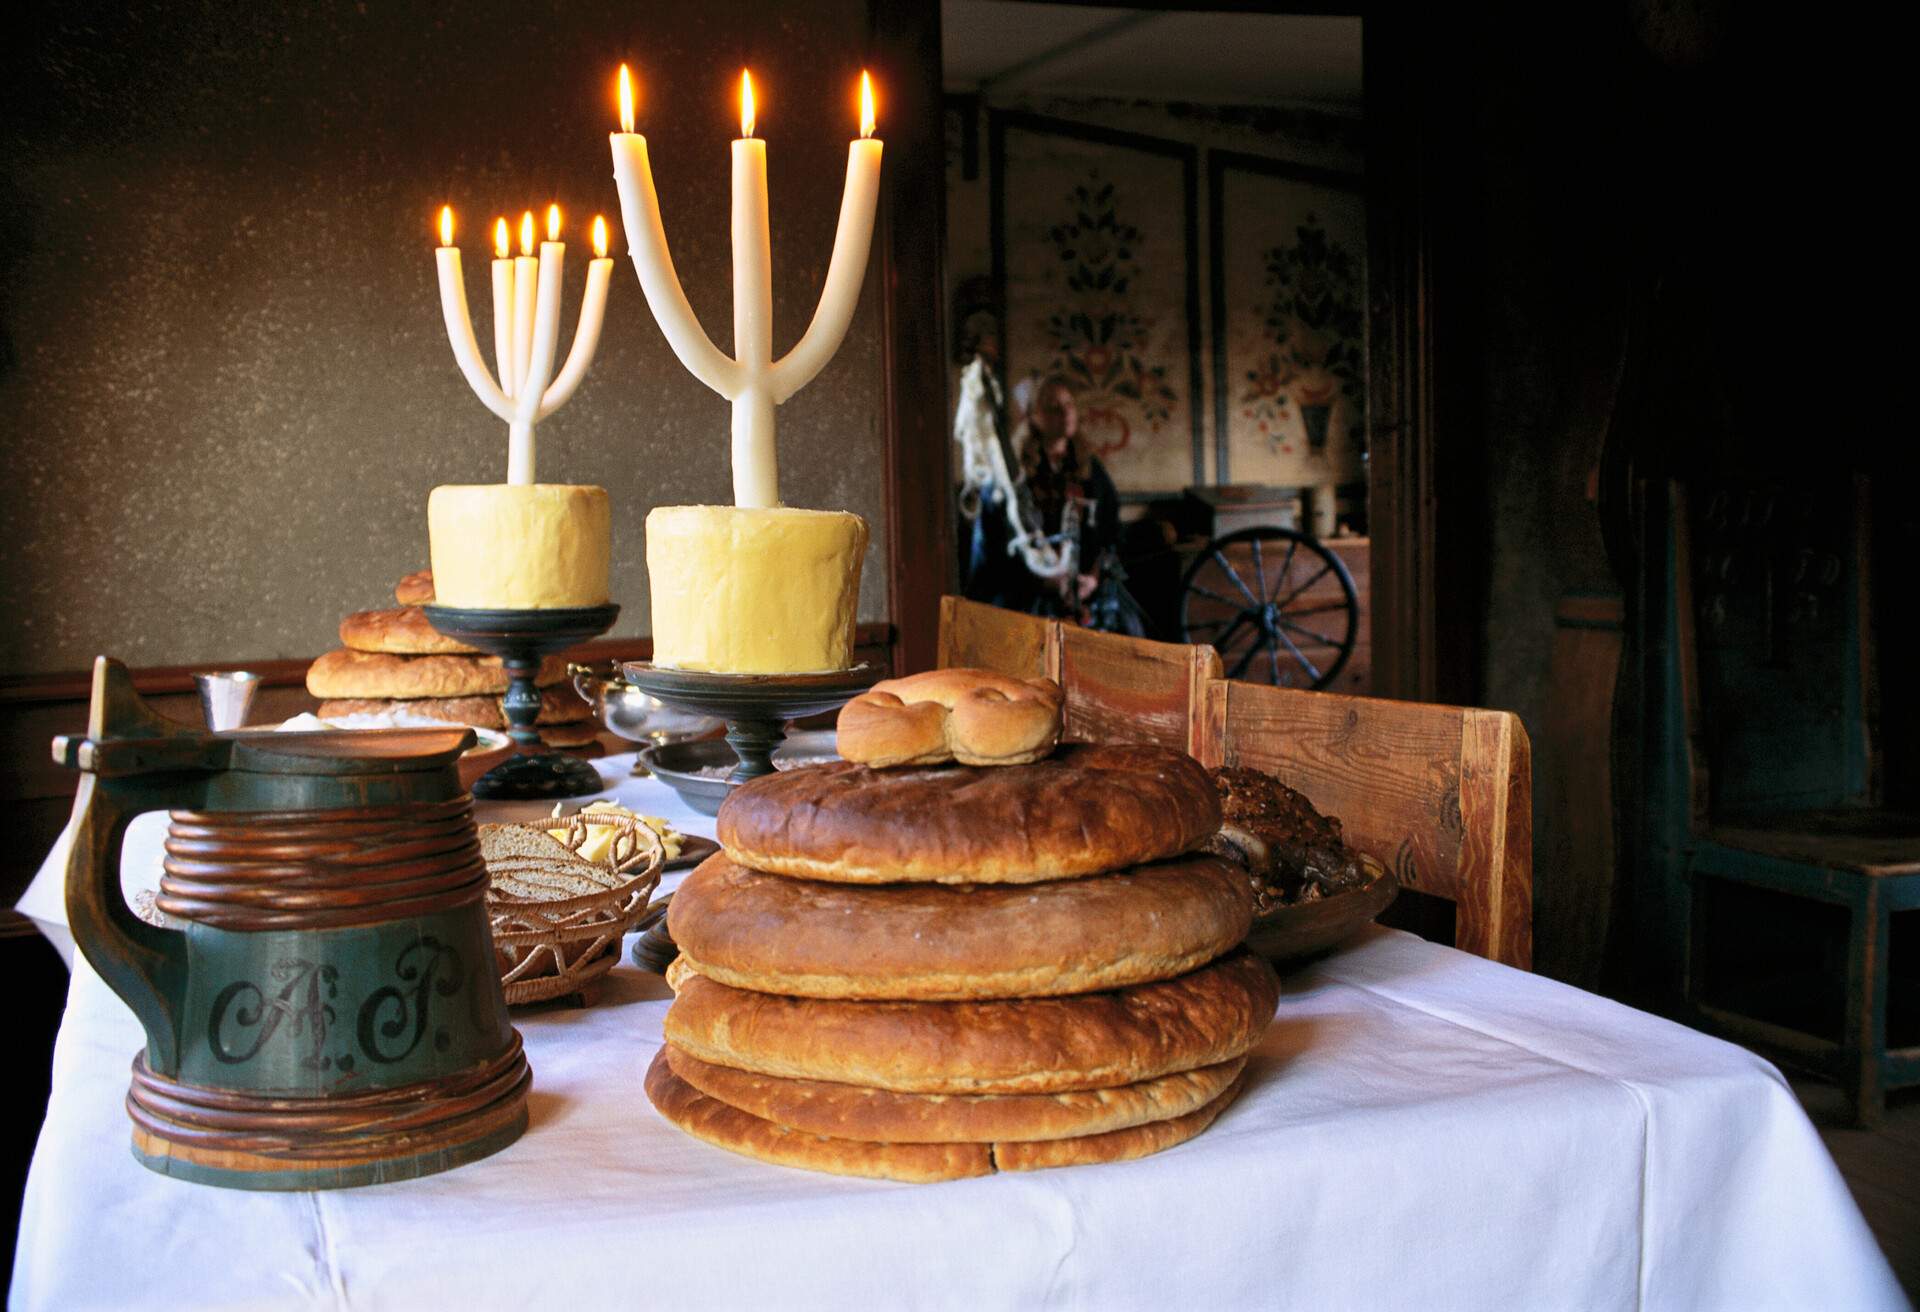 A dinner table with a white tablecloth, plates of bread and cheese, and fork-shaped candles perched on candlesticks.